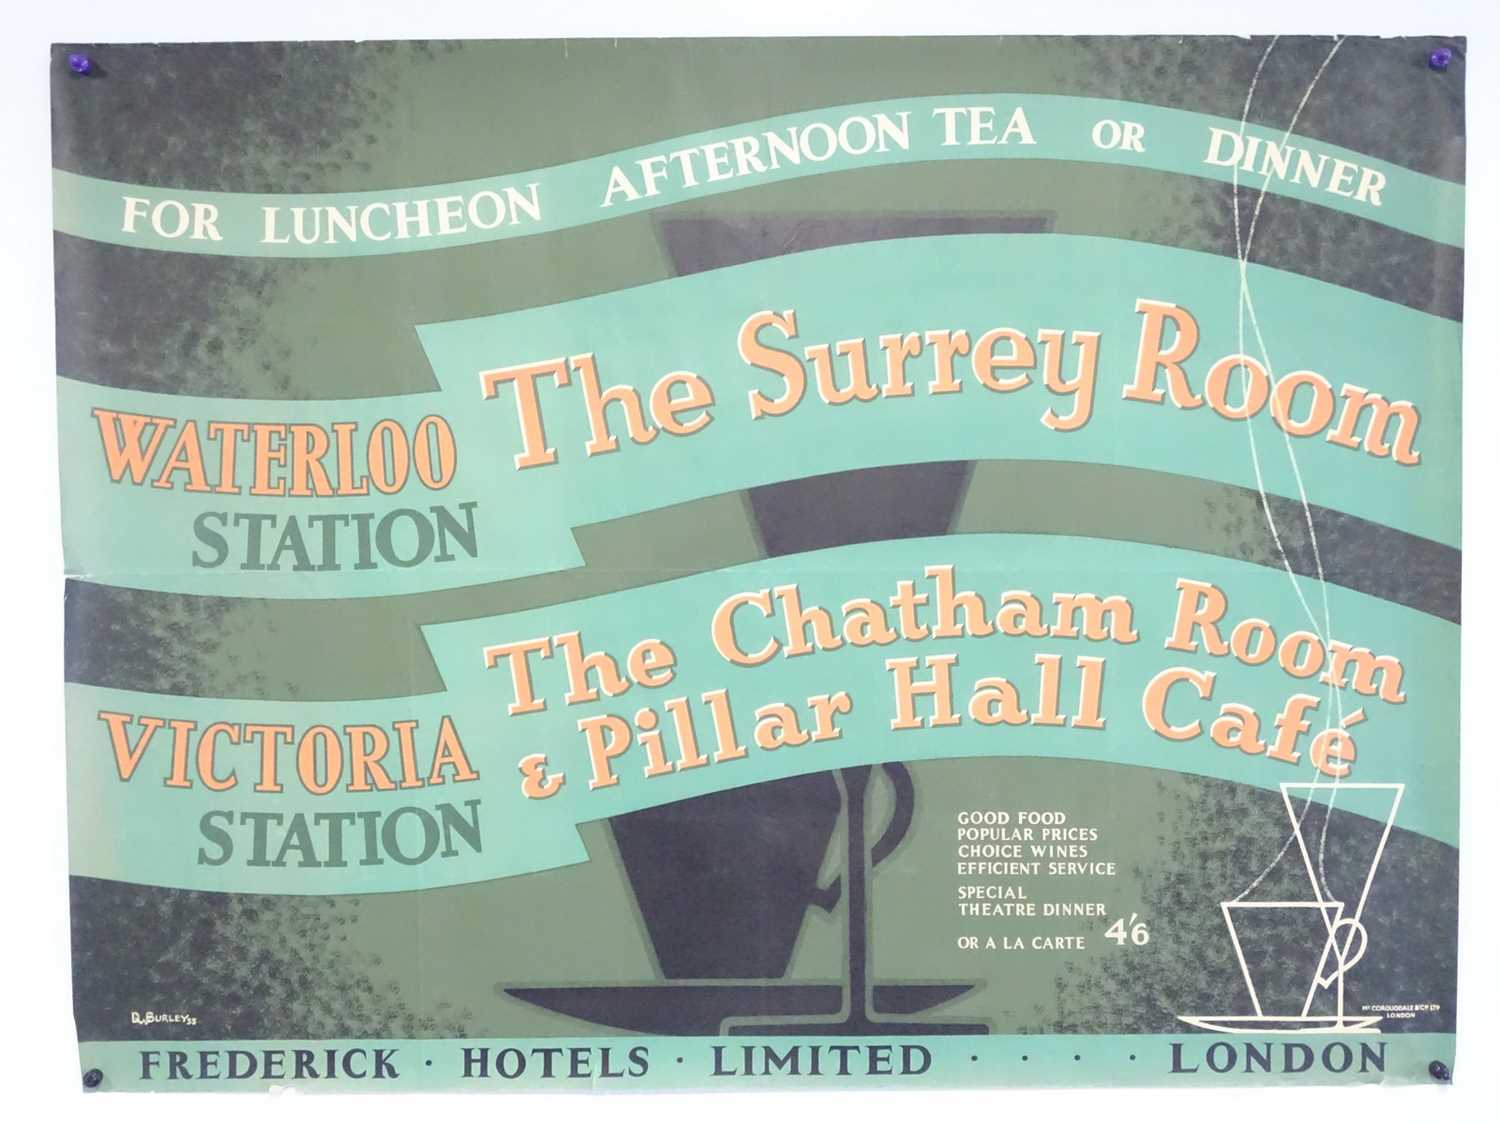 A railways refreshments advertising poster for: FREDRICK HOTELS LIMITED - 'The Surrey Room at